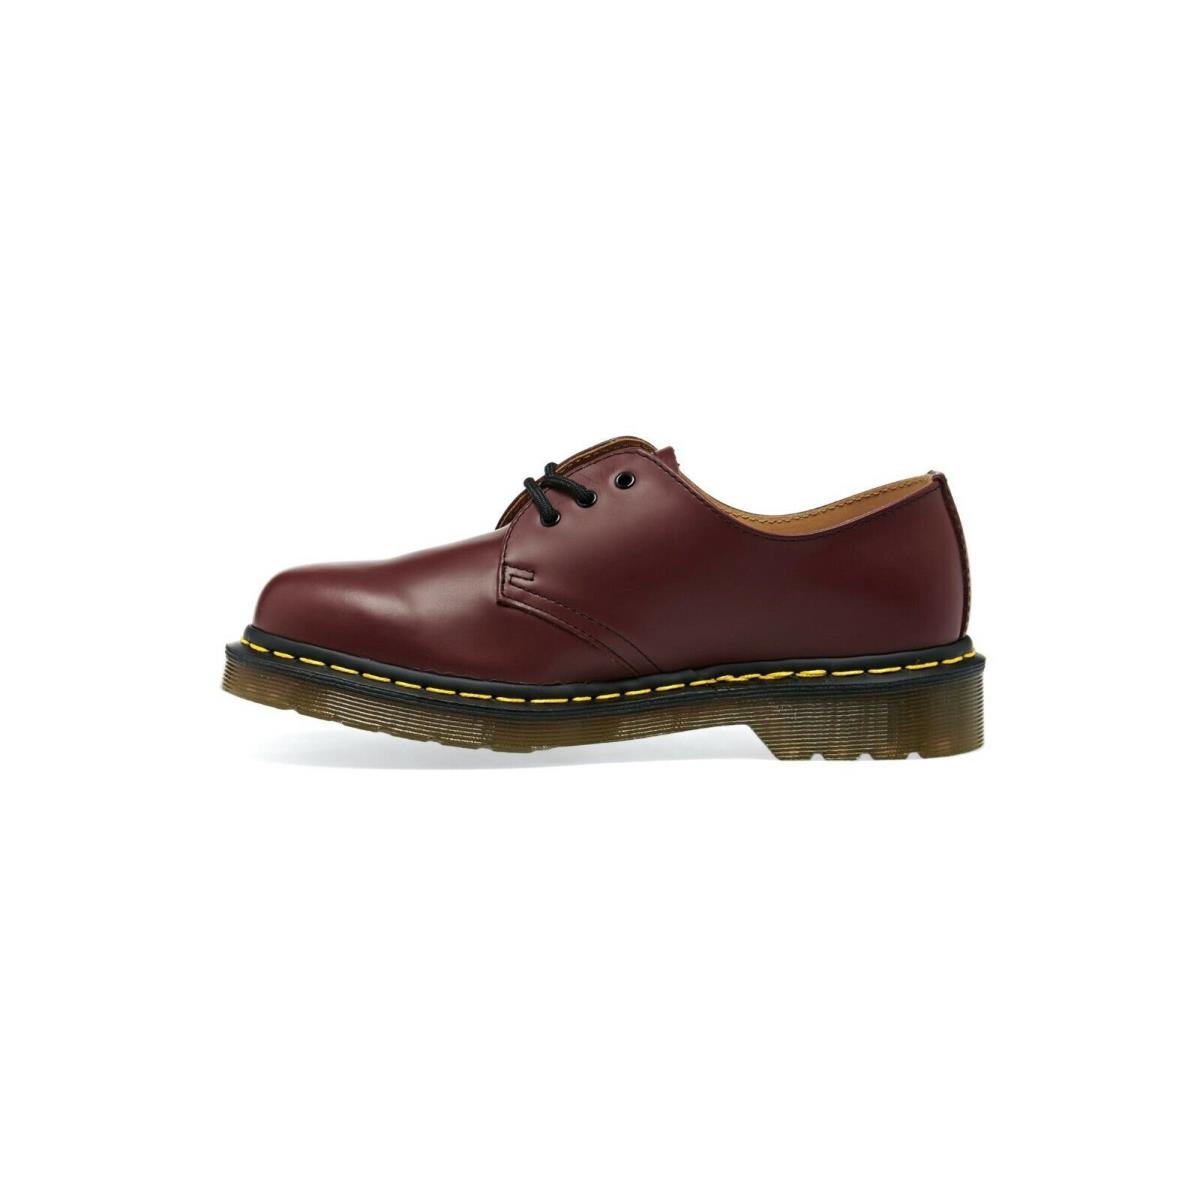 Dr Martens Classic 1461 Cherry Red Smooth Leather Men Women Platform Shoes